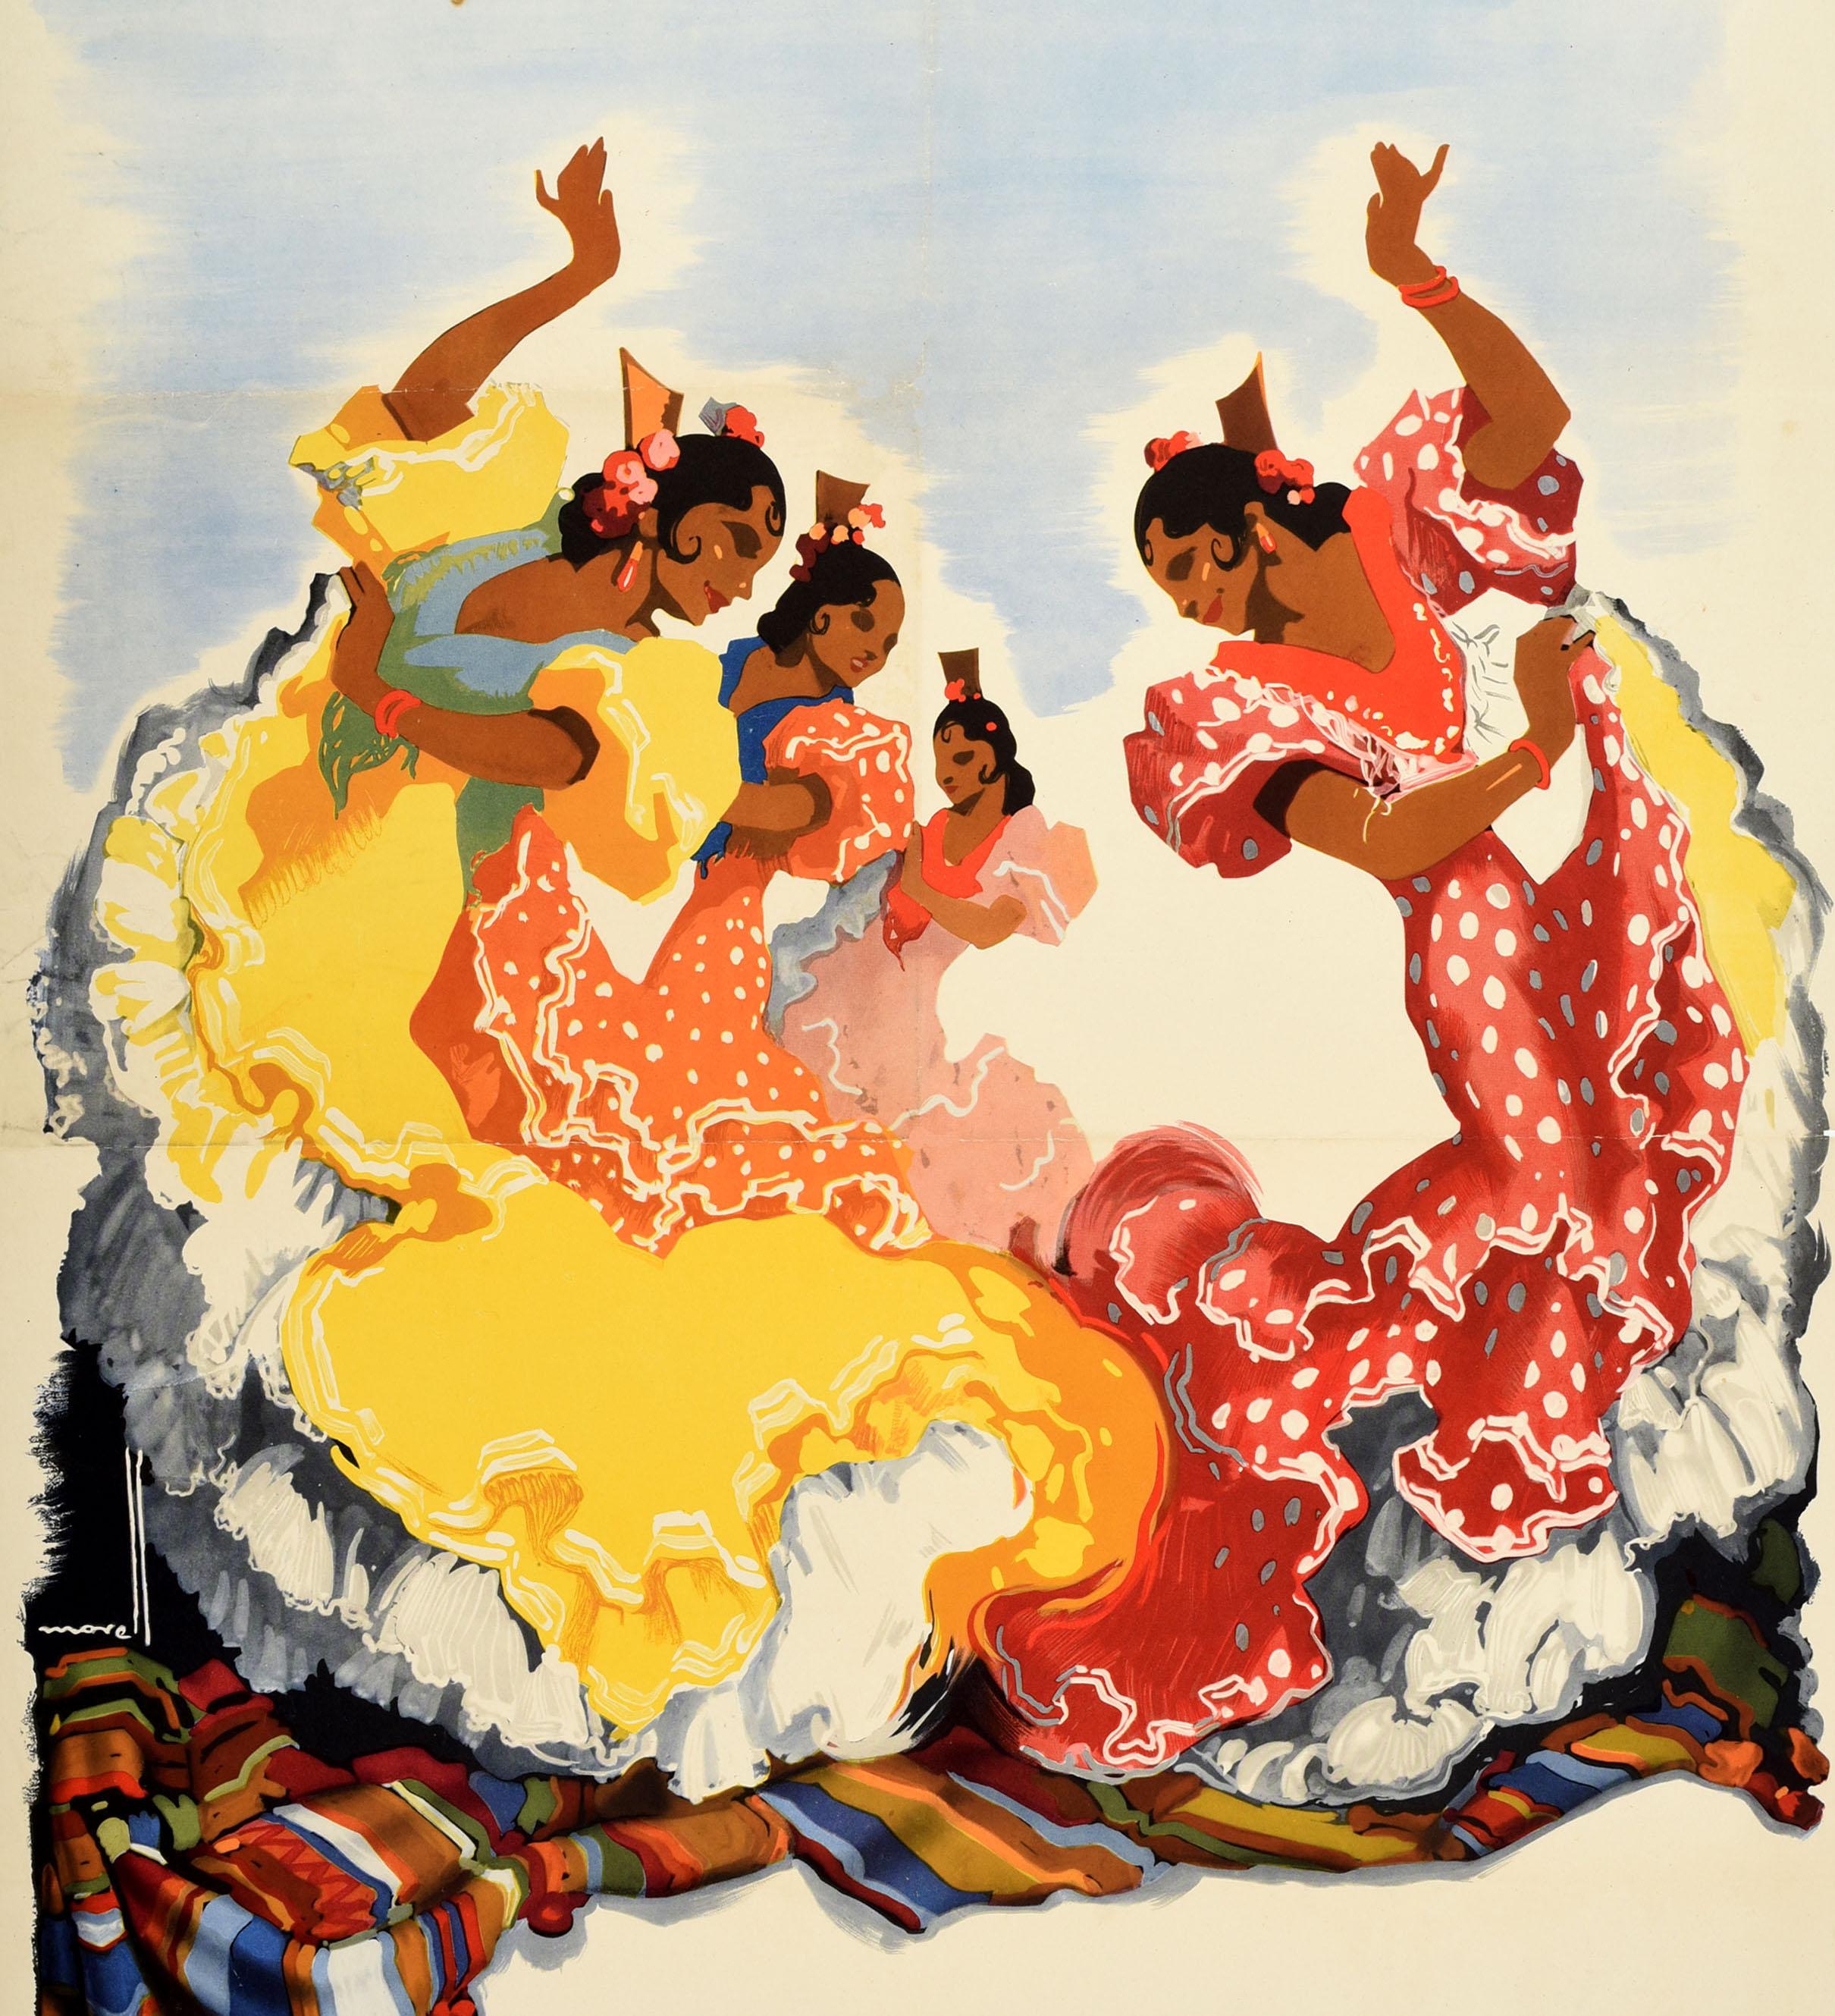 Original vintage travel poster for Spain featuring an illustration by the Spanish artist Jose Morell (1899-1949) of dancers in traditional flamenco dresses with flowers in their hair, dancing on a striped cloth with the bold text below. Published by